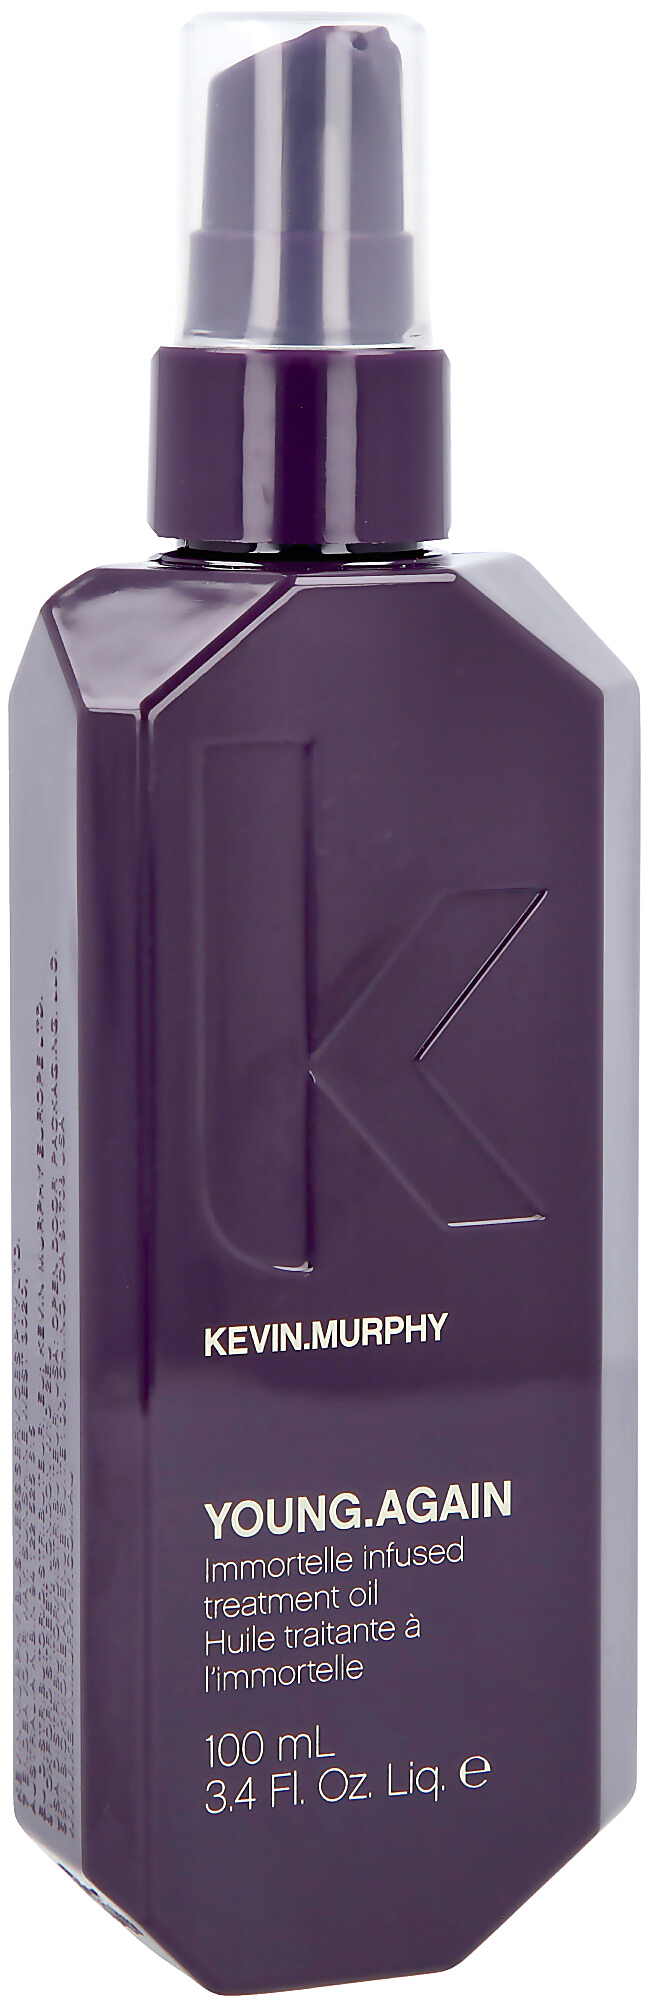 Kevin Murphy Young Again Treatment oil